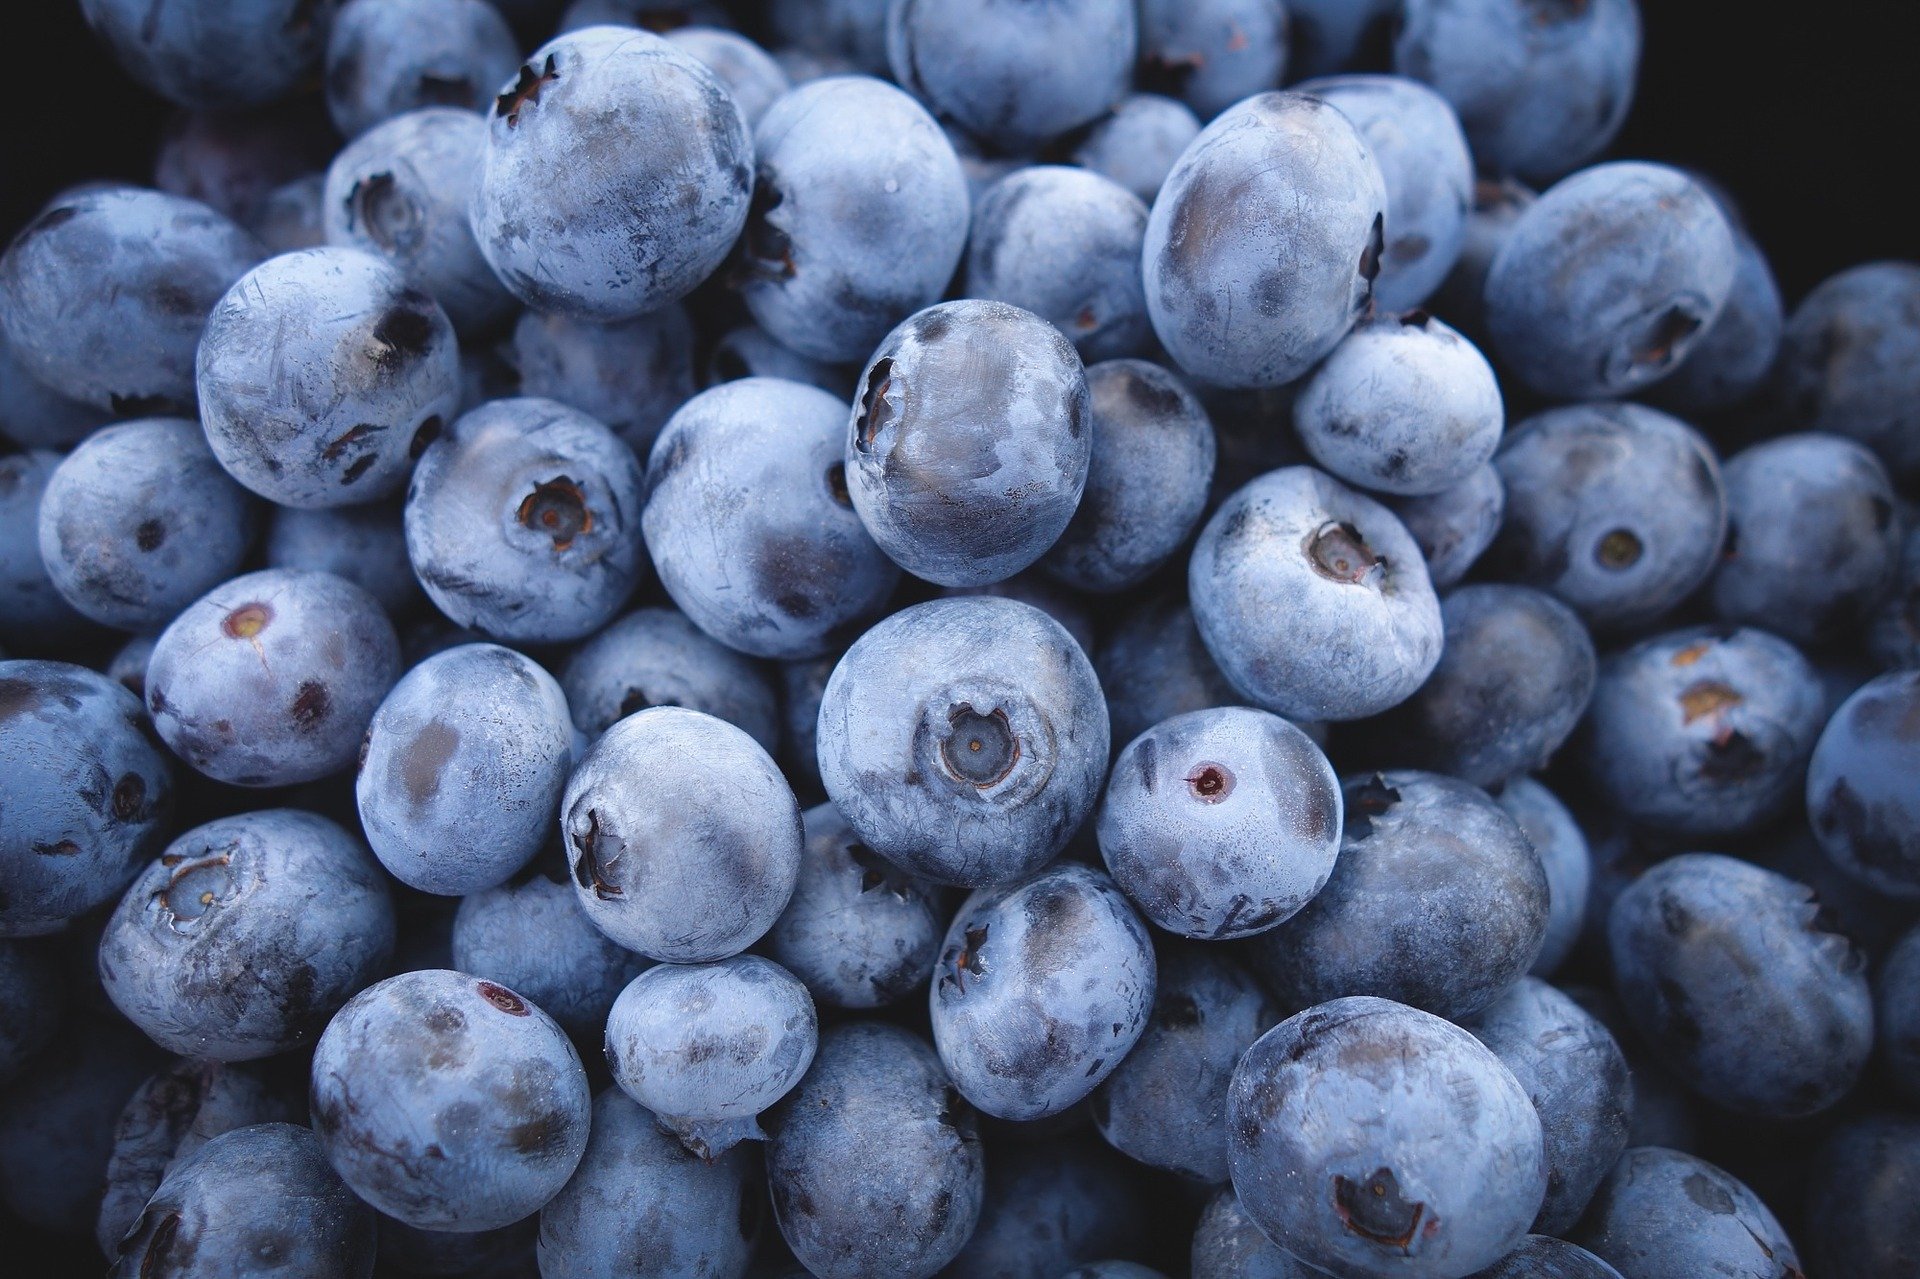 Benefits of blueberries for your skin